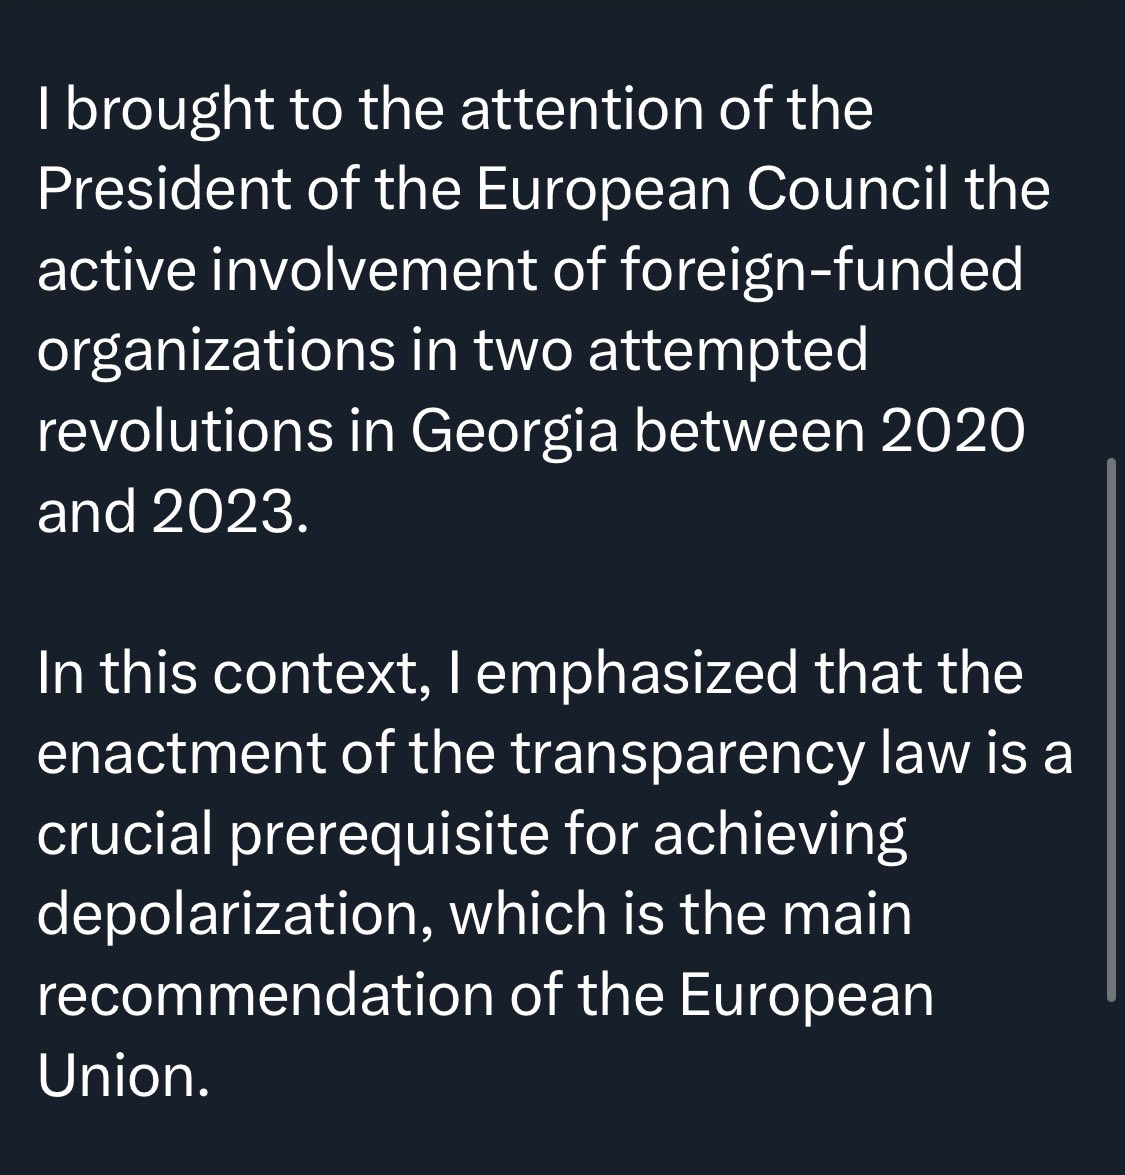 Honestly, I mean, MOSCOW SPEAKING🇷🇺, literally. 
🇬🇪 PM now responds to the President of #EuropeanCouncil 
#DeOligarchisation #Sanctions #NoToRussianLaw #GeorgiaIsEurope #GeorgiaProtests #TbilisiProtests